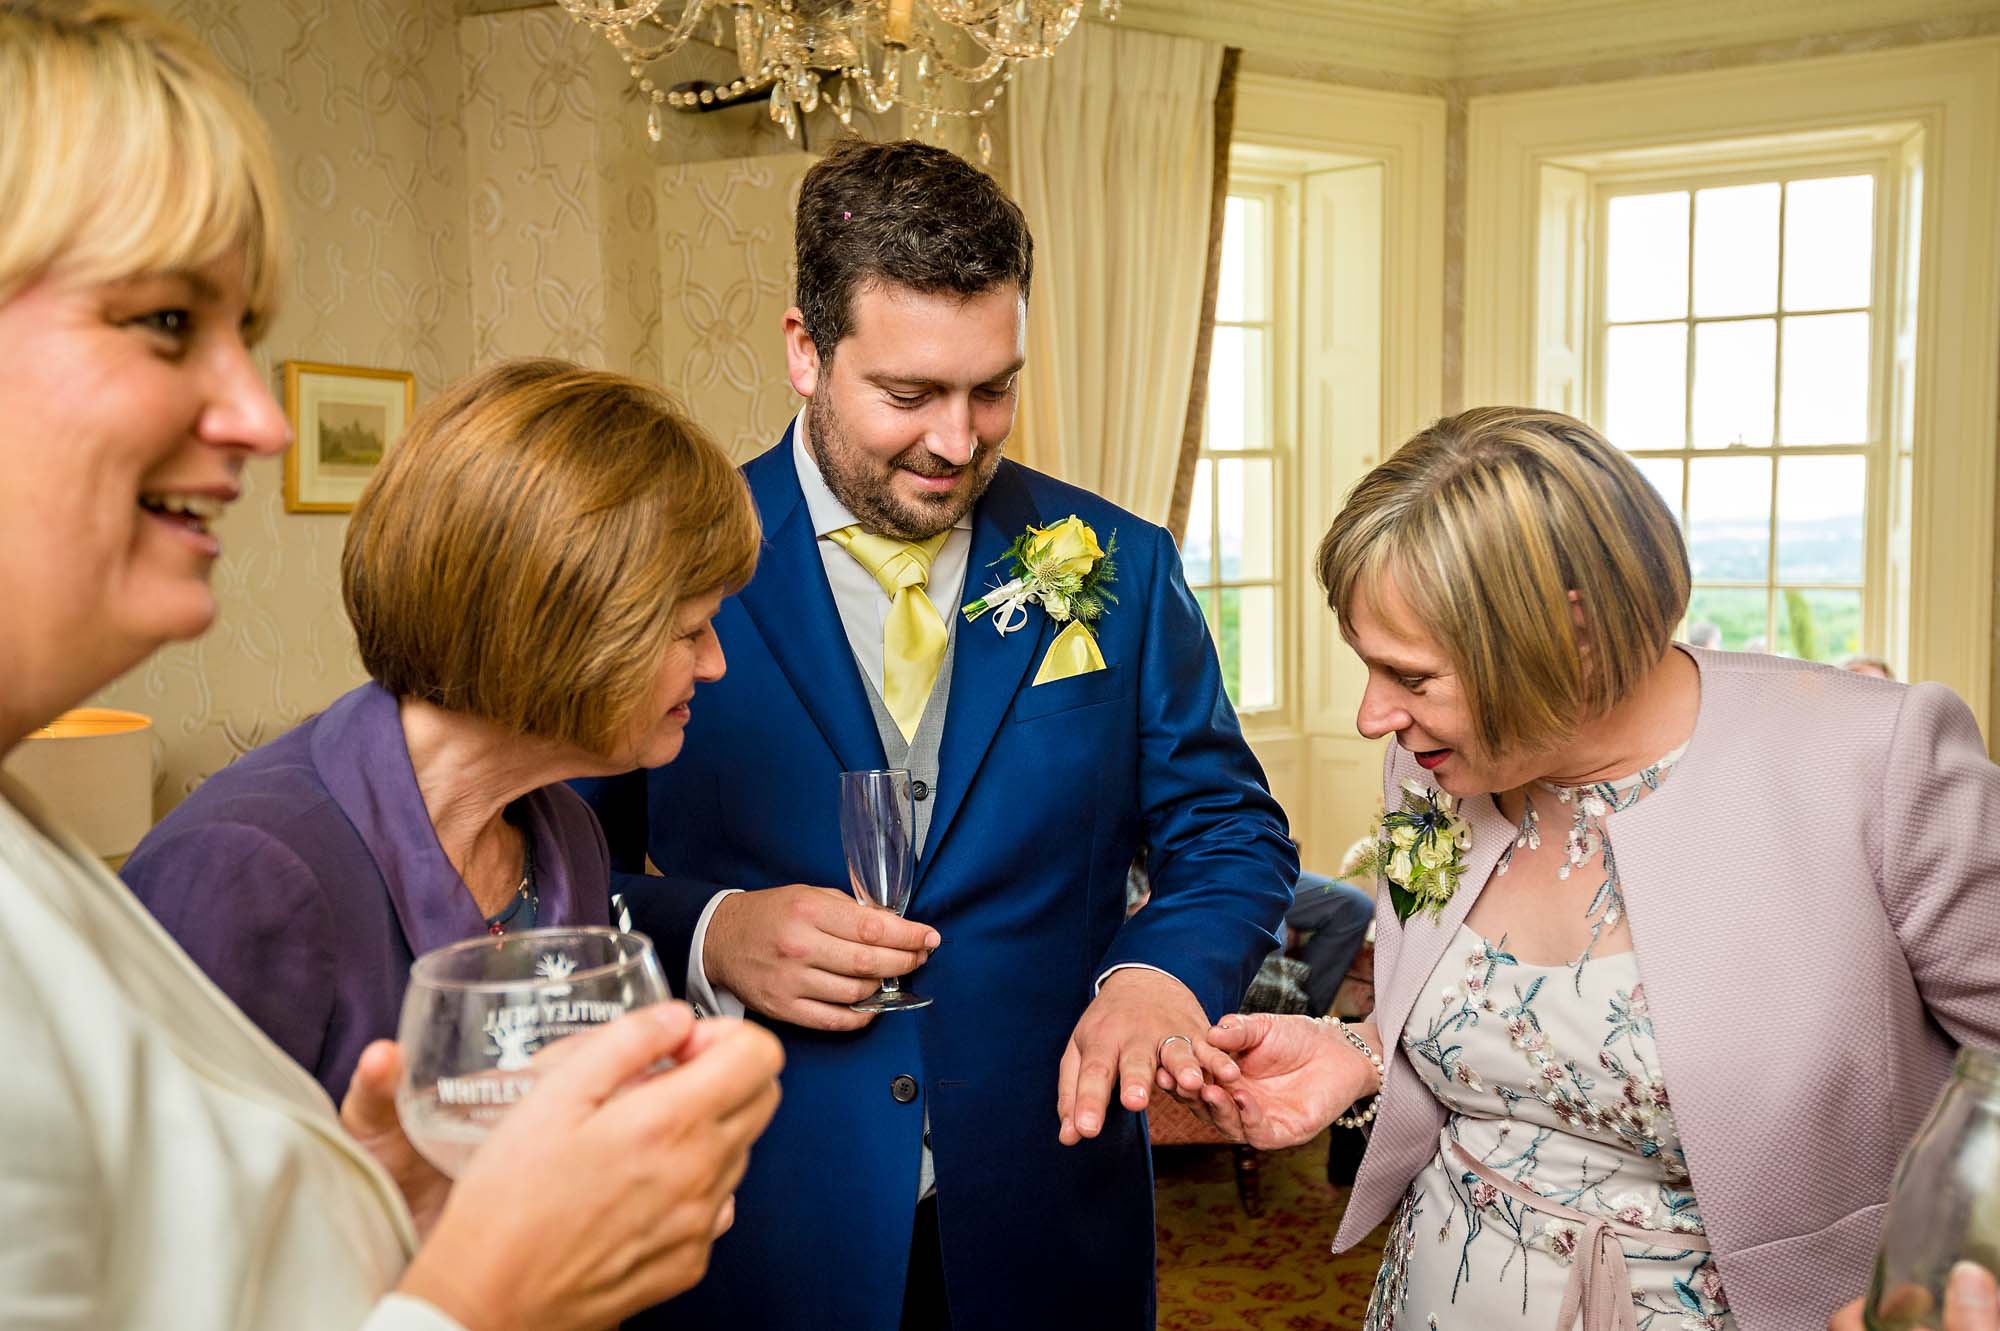 Bride's mum admiring groom's wedding ring with other guests